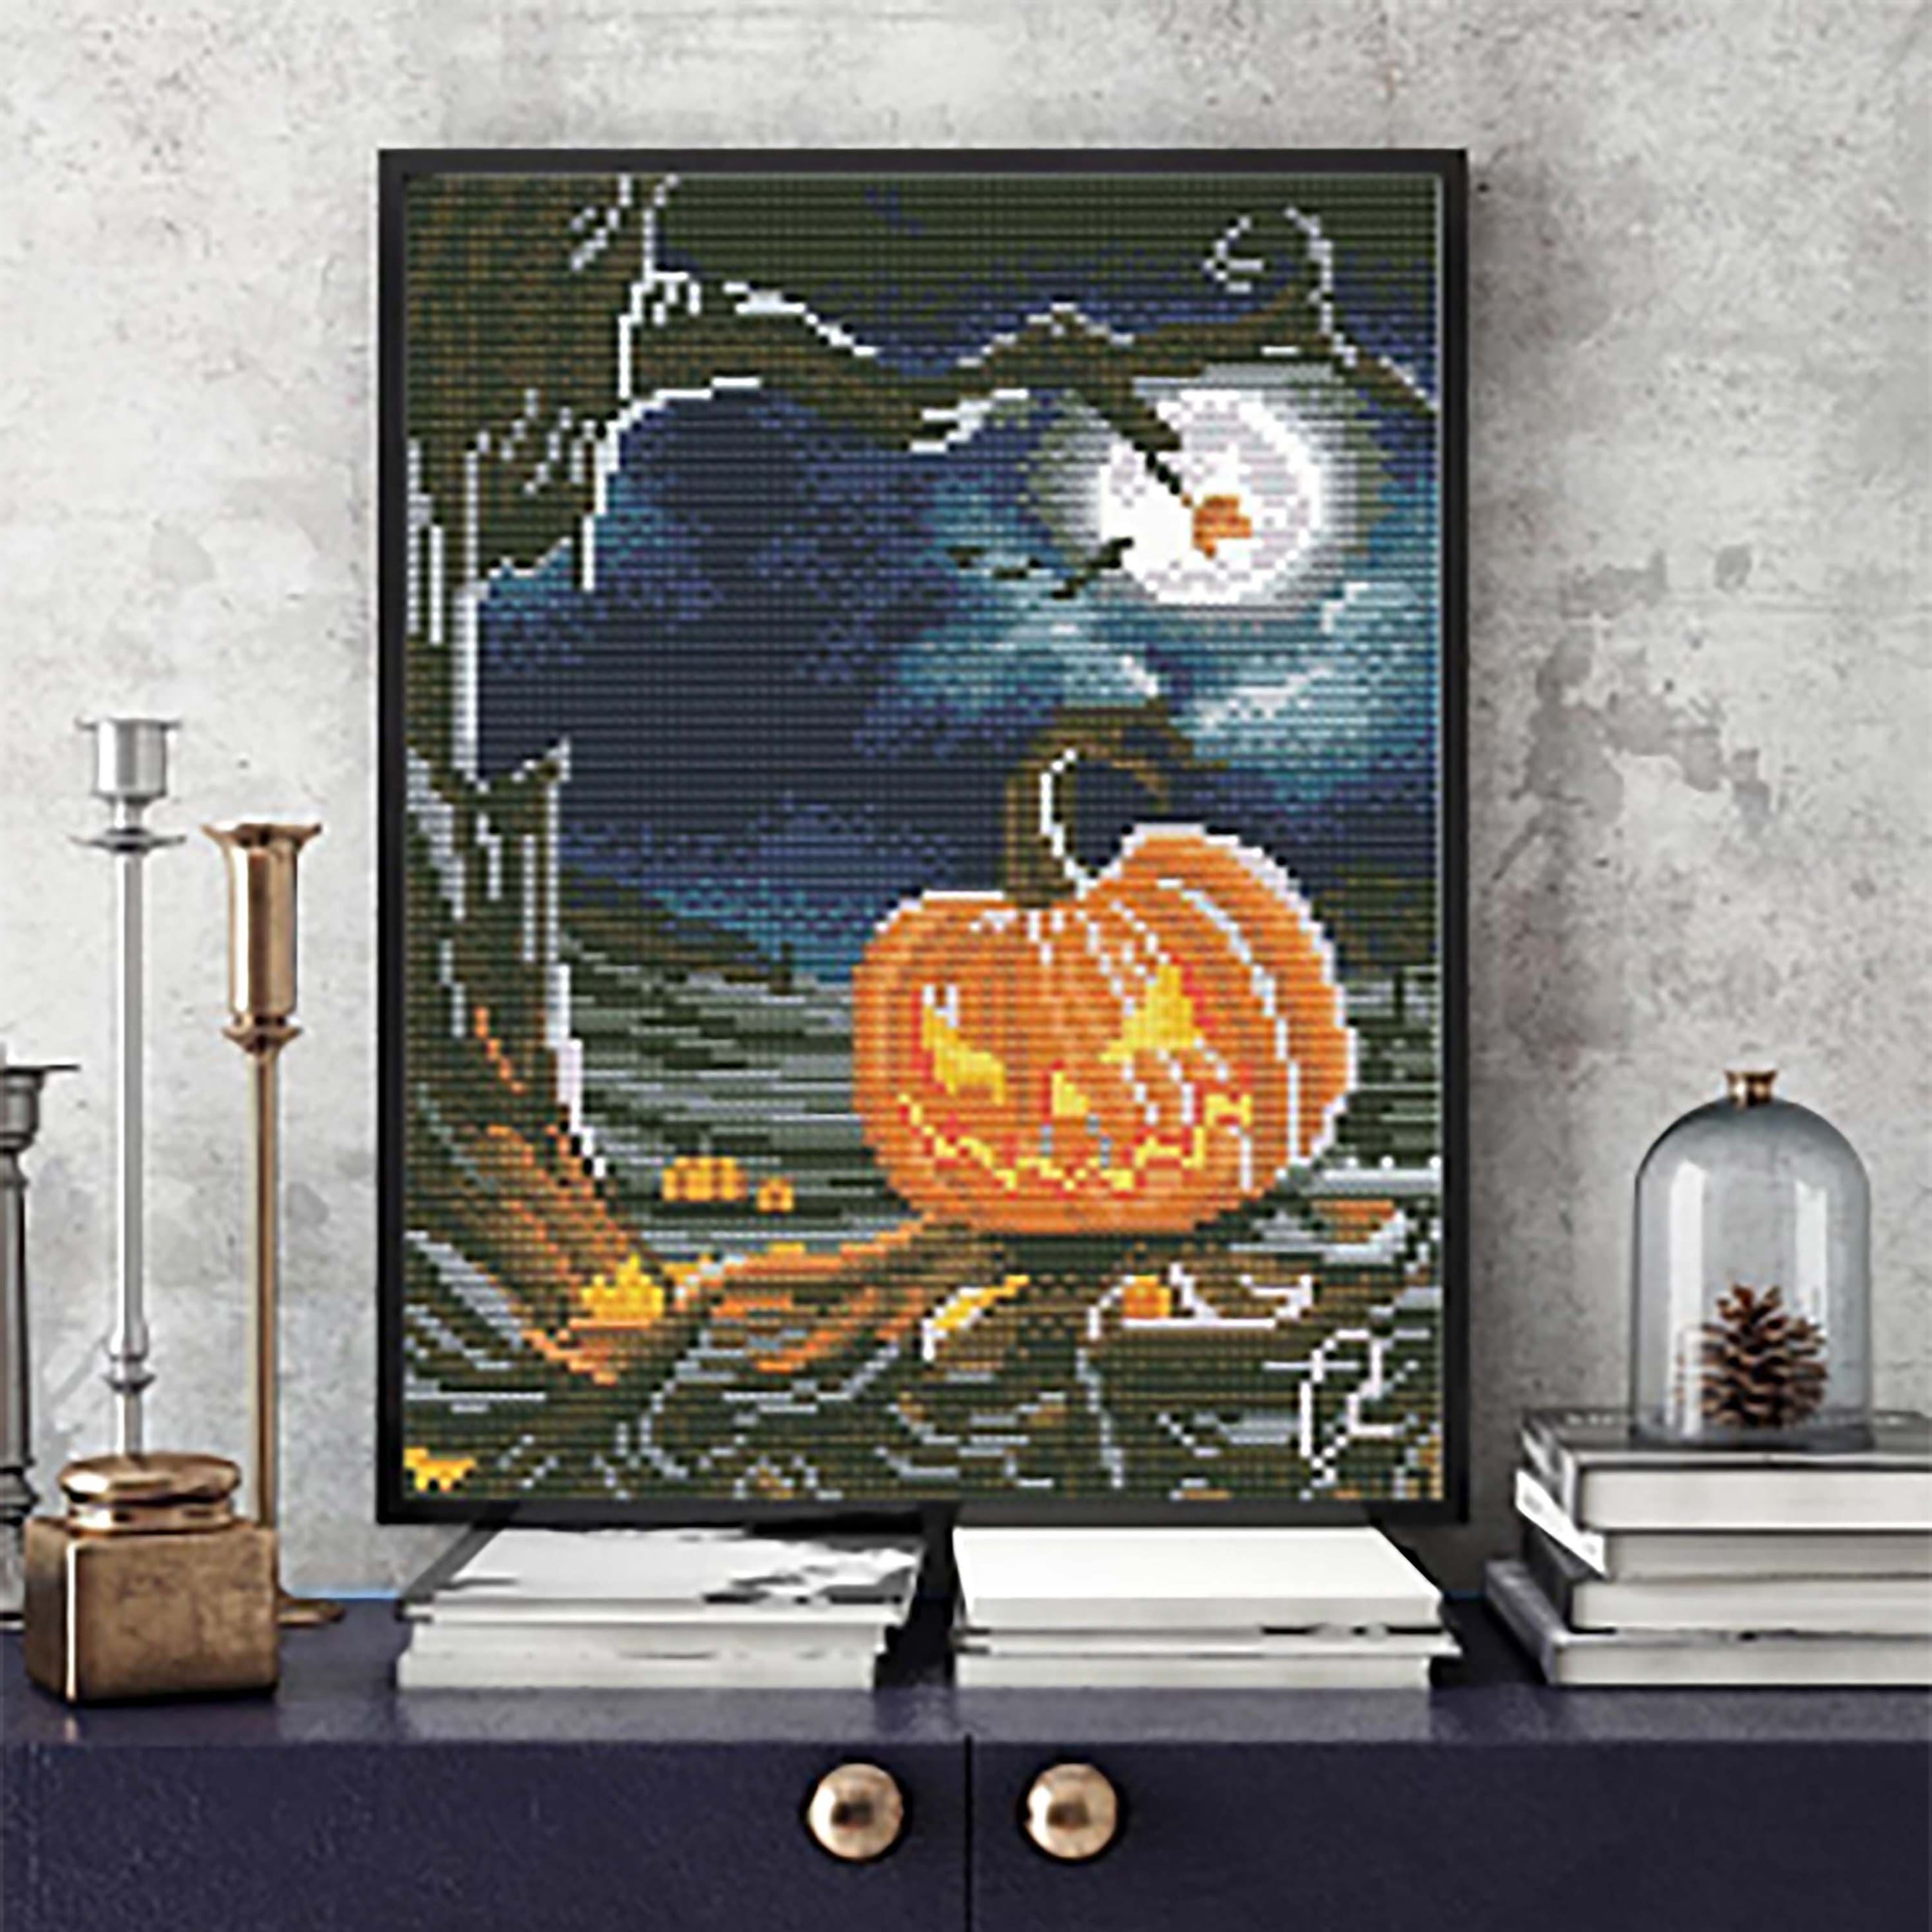 Sparkly Selections Pumpkin by Tree Glow in the Dark Diamond Art Kit